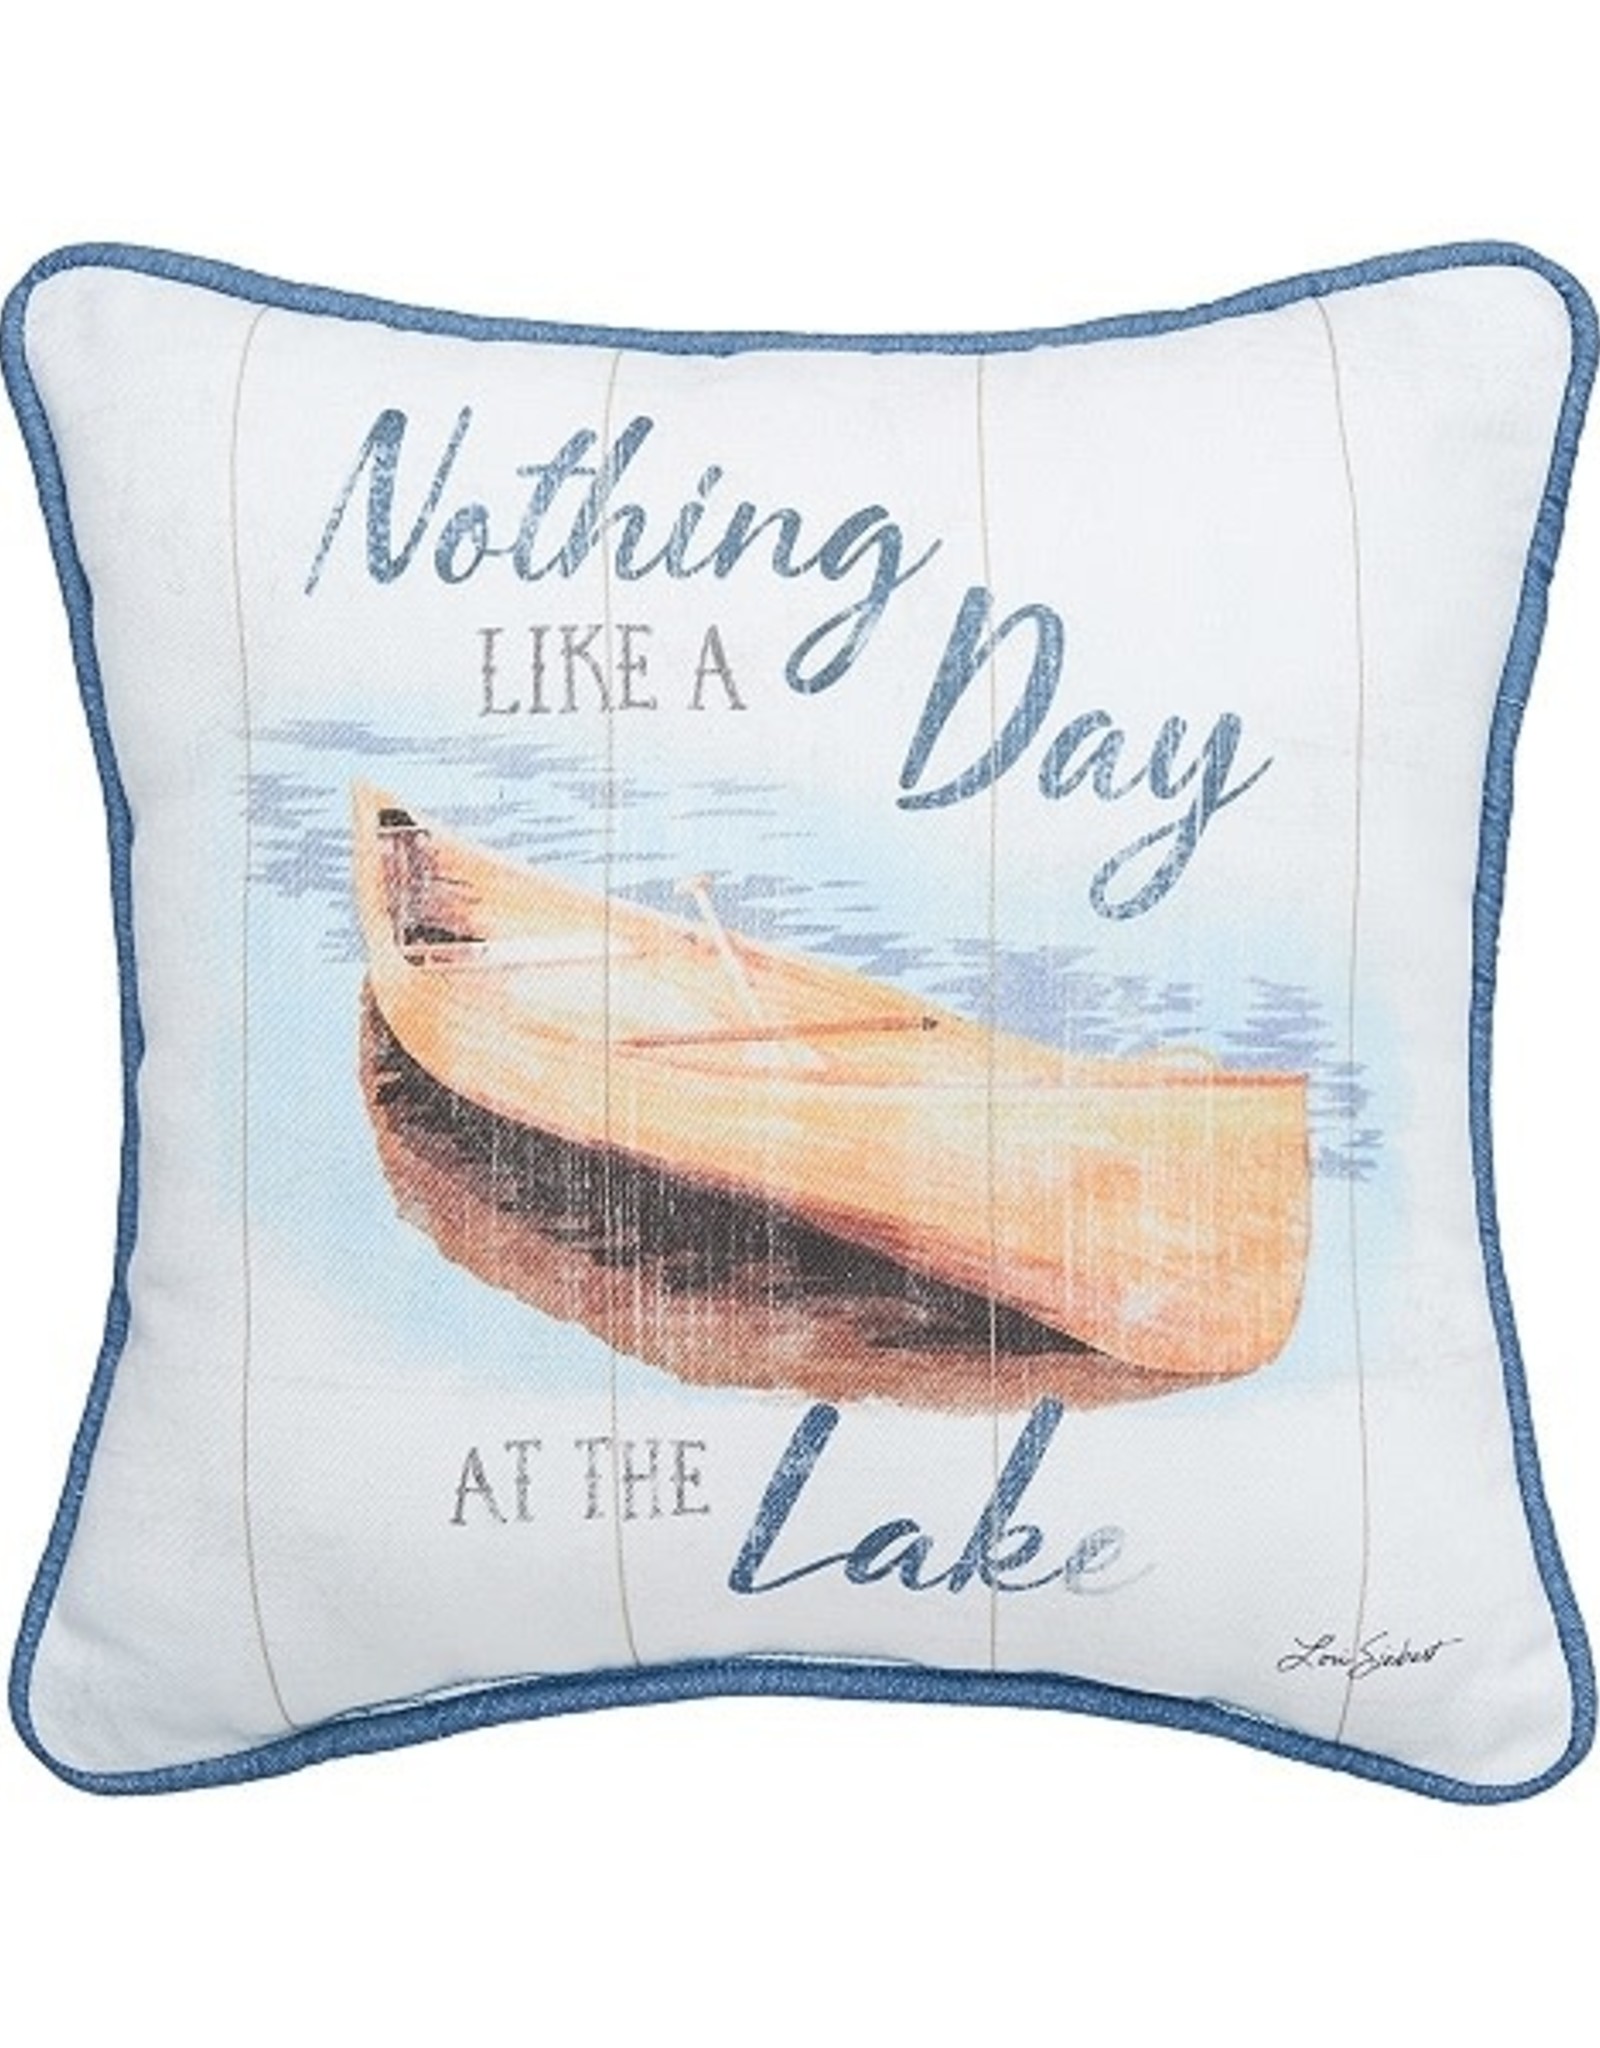 C and F Enterprises DAY AT THE LAKE PILLOW